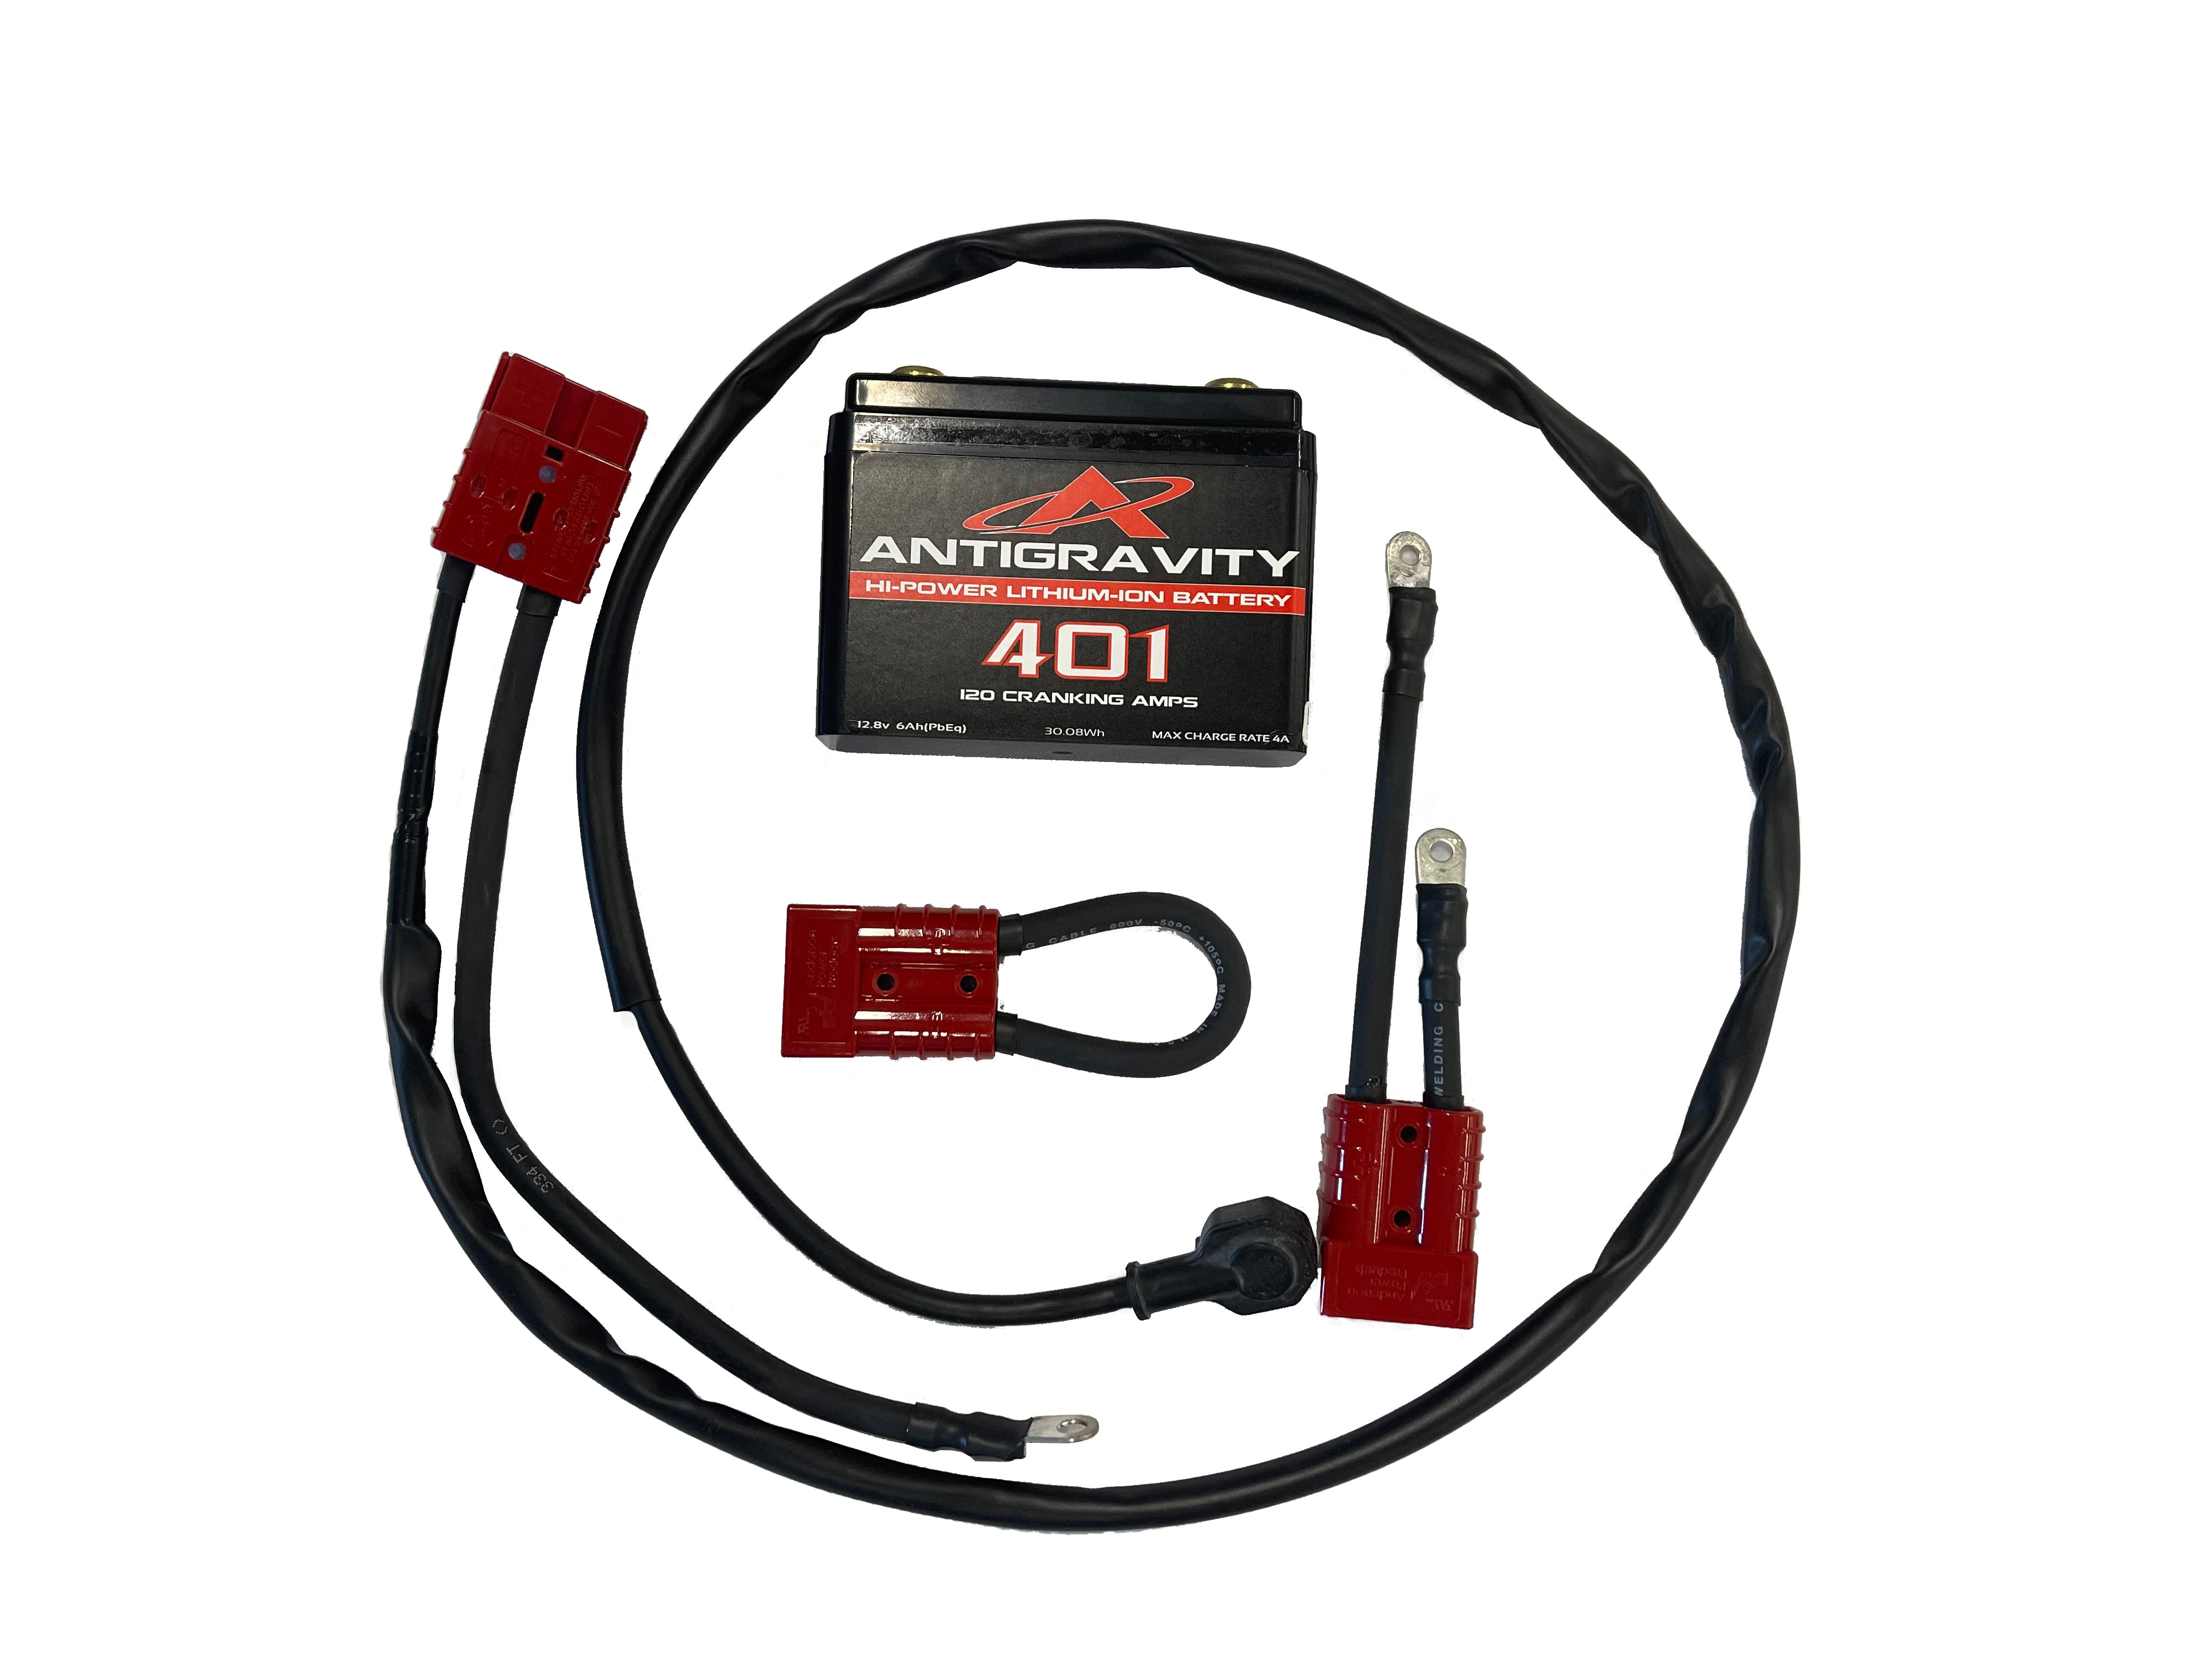 YFZ450R 24 Volt Starting System with Lithium Battery